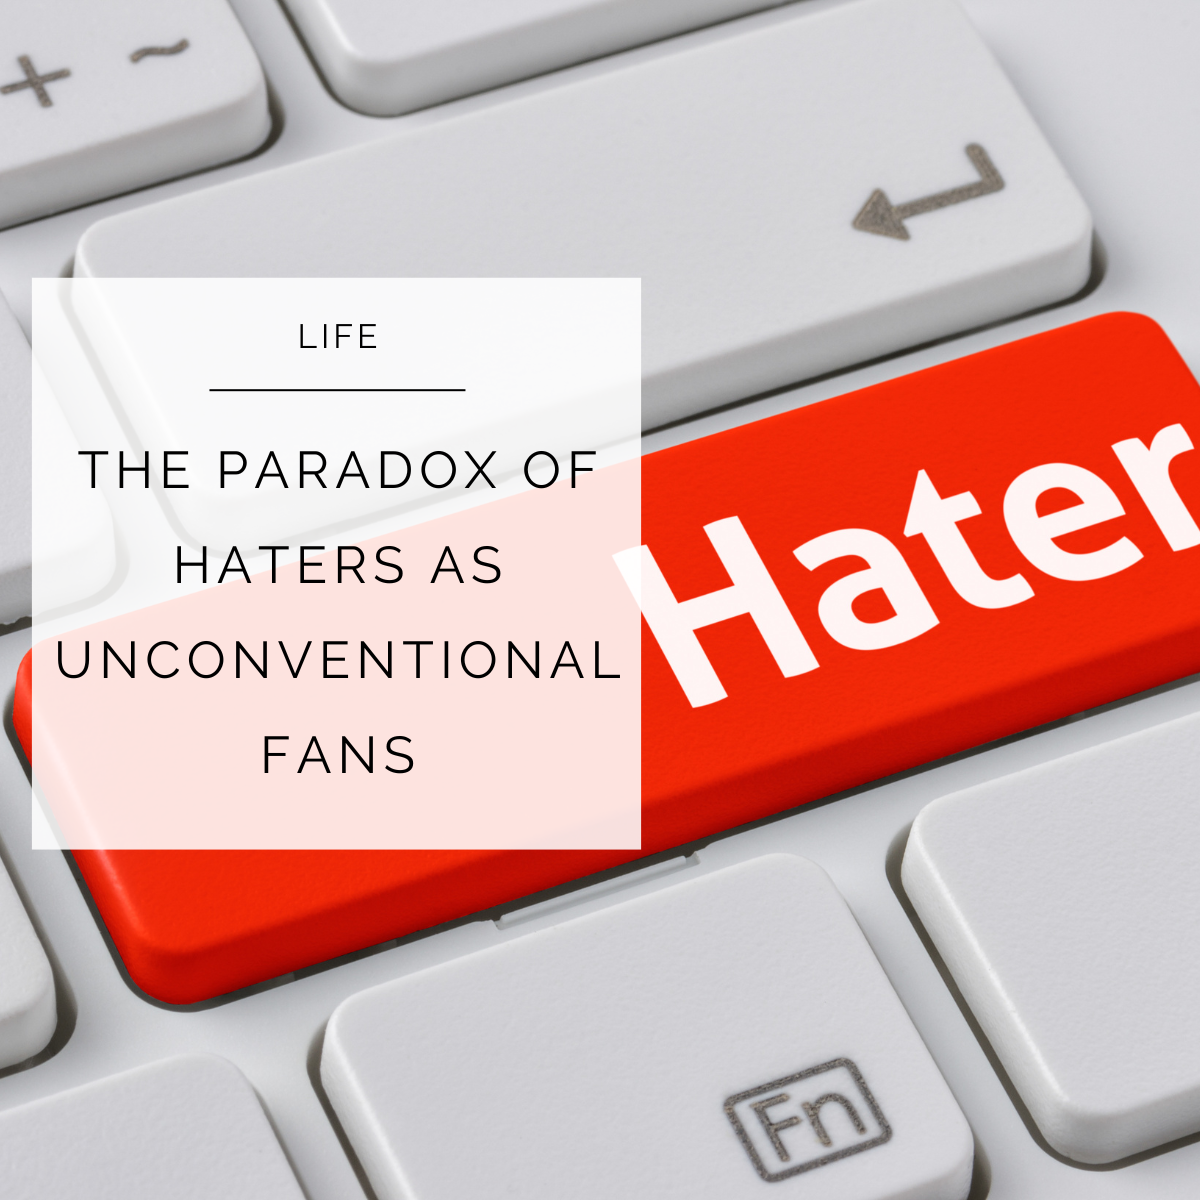 The Paradox of Haters as Unconventional Fans